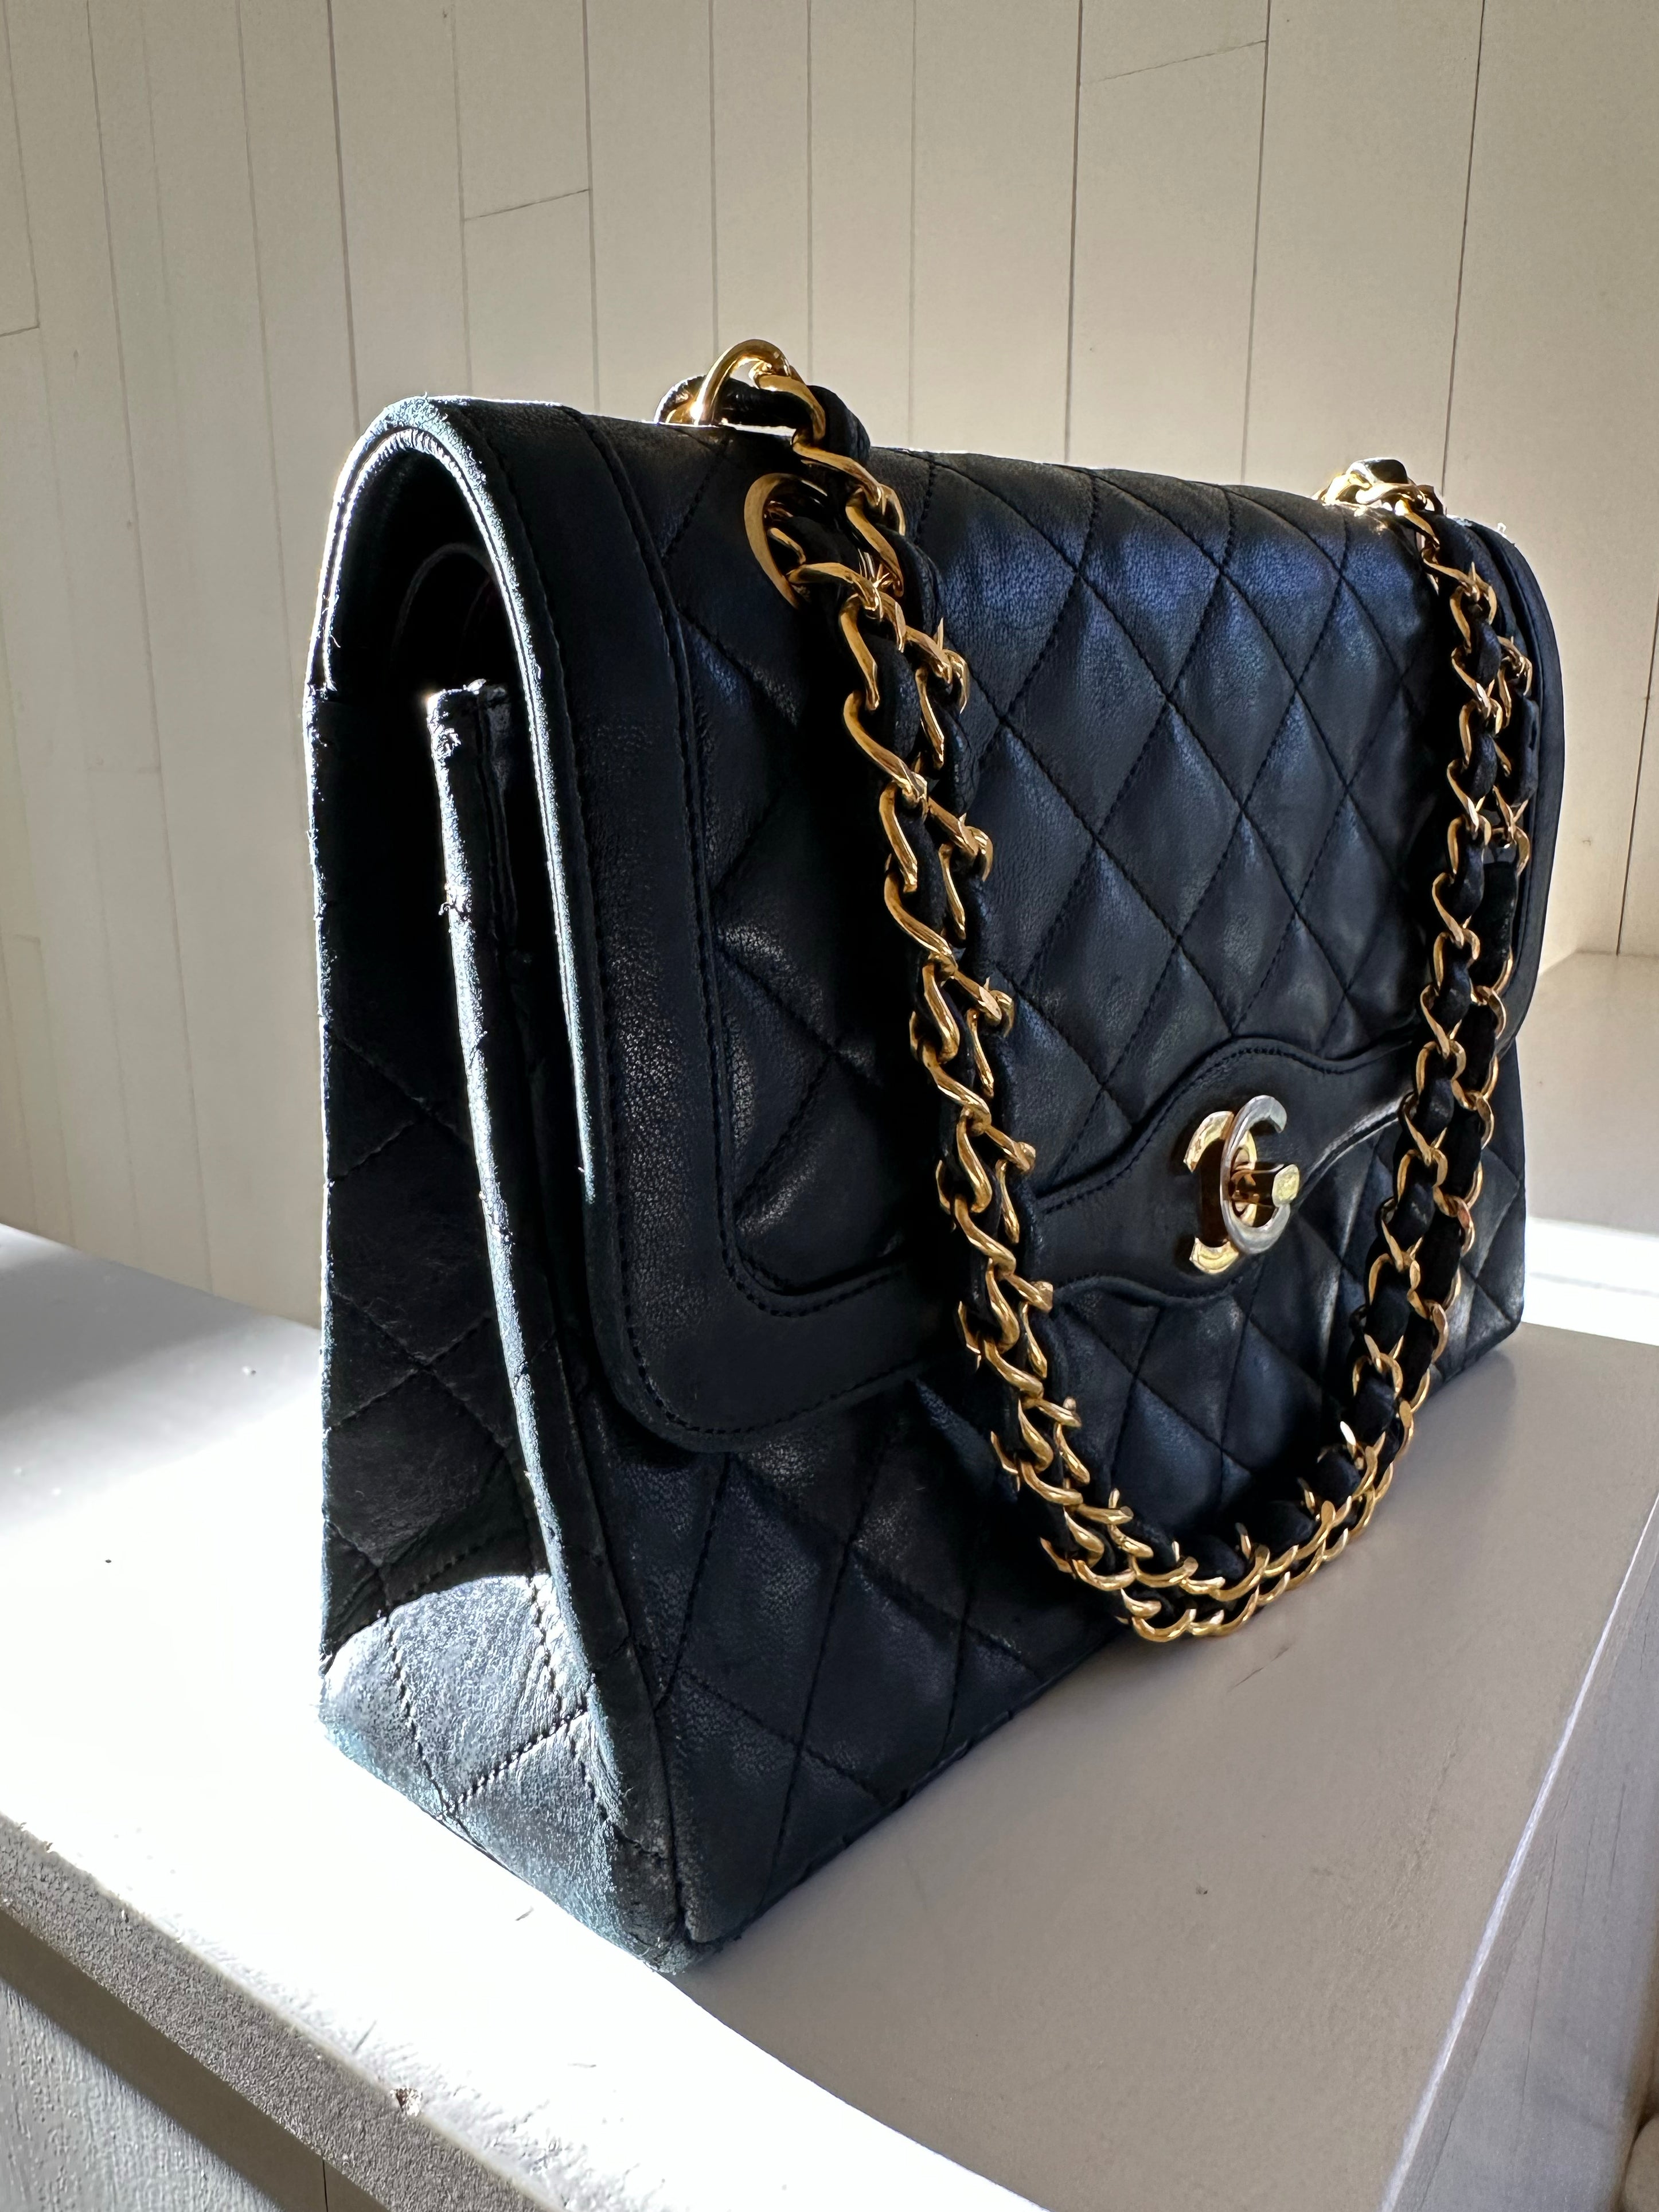 Chanel History with Complete Bag Style Guide | Yoogi's Closet